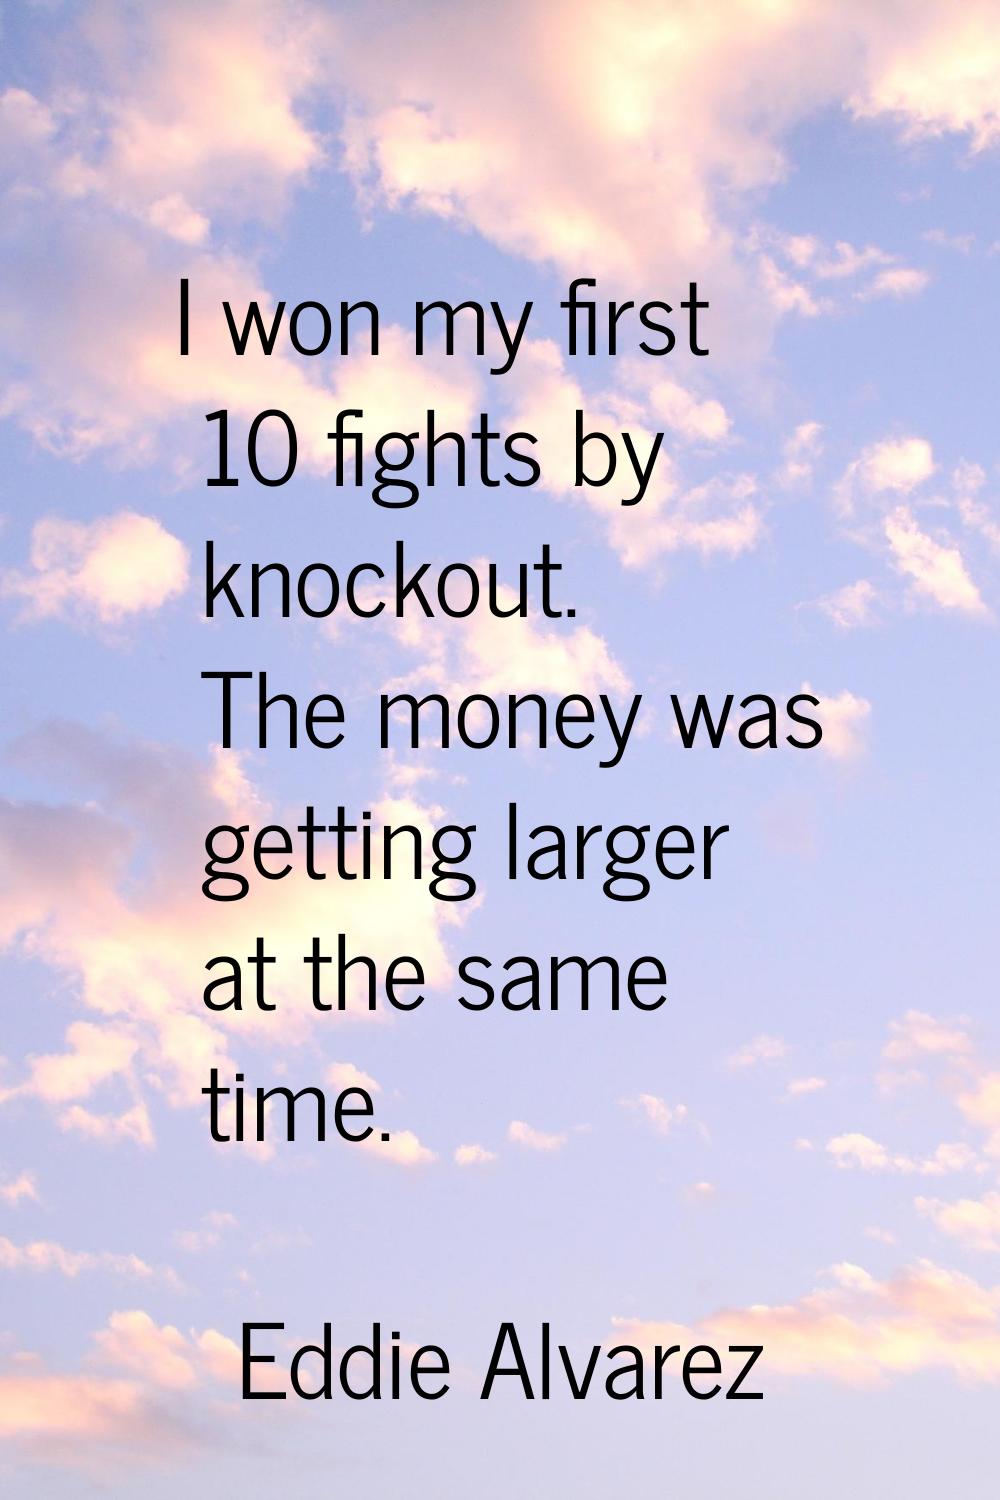 I won my first 10 fights by knockout. The money was getting larger at the same time.